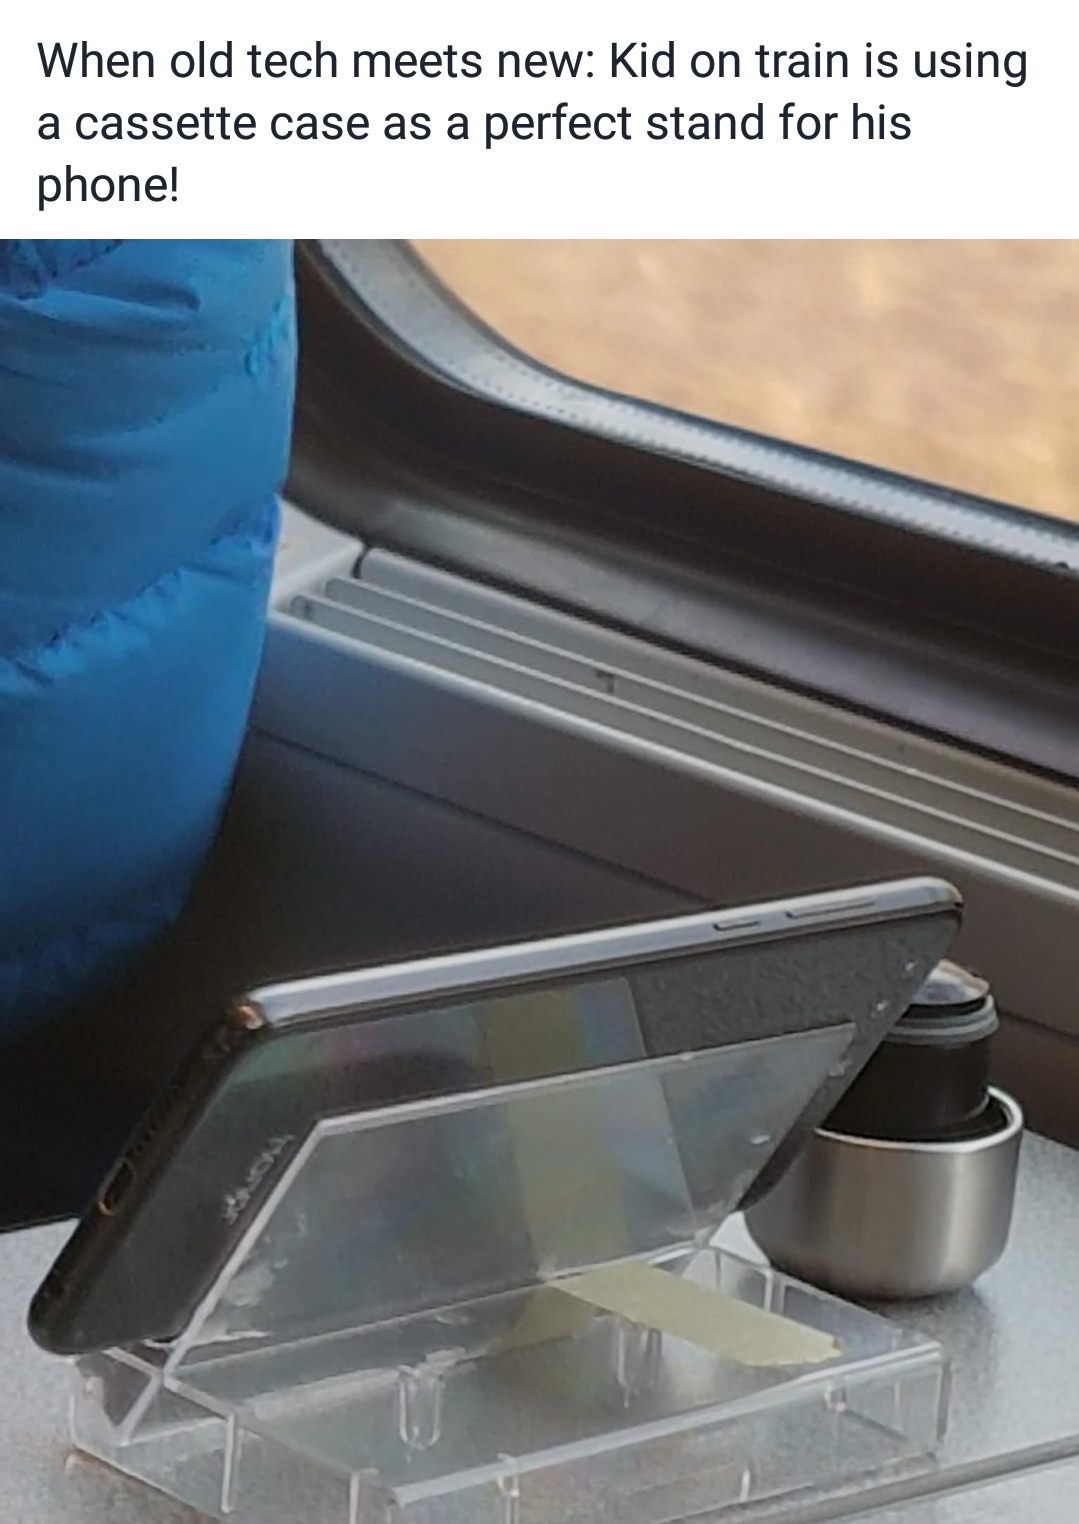 angle - When old tech meets new Kid on train is using a cassette case as a perfect stand for his phone!